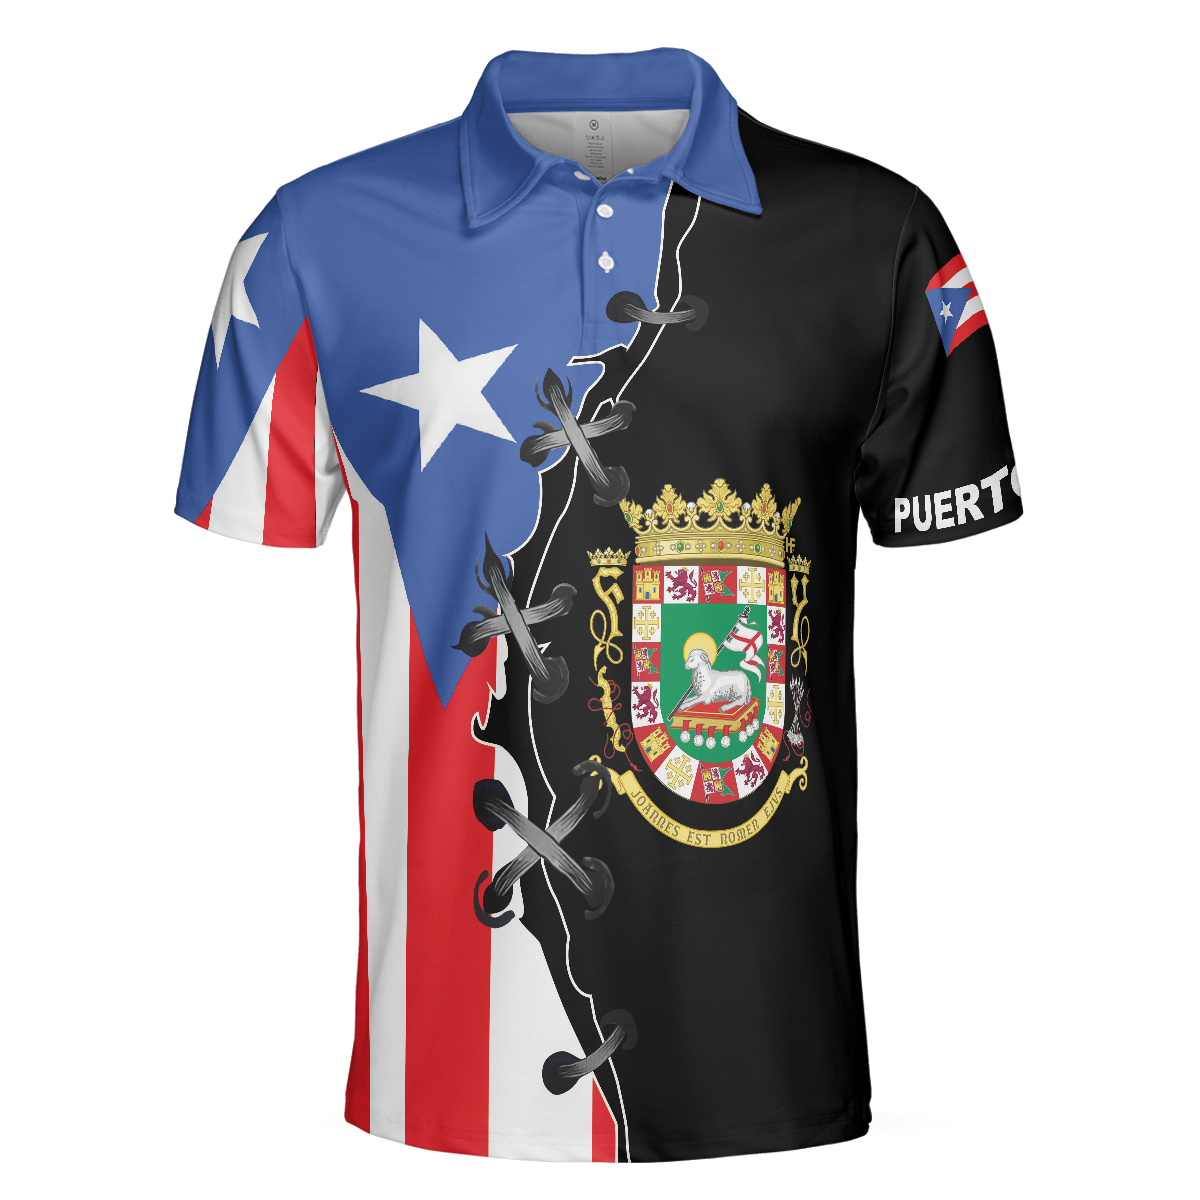 Puerto Rico Polo Shirt Puerto Rico Flag Polo Shirt Design For Adults Best American Fans Gift Idea - 3